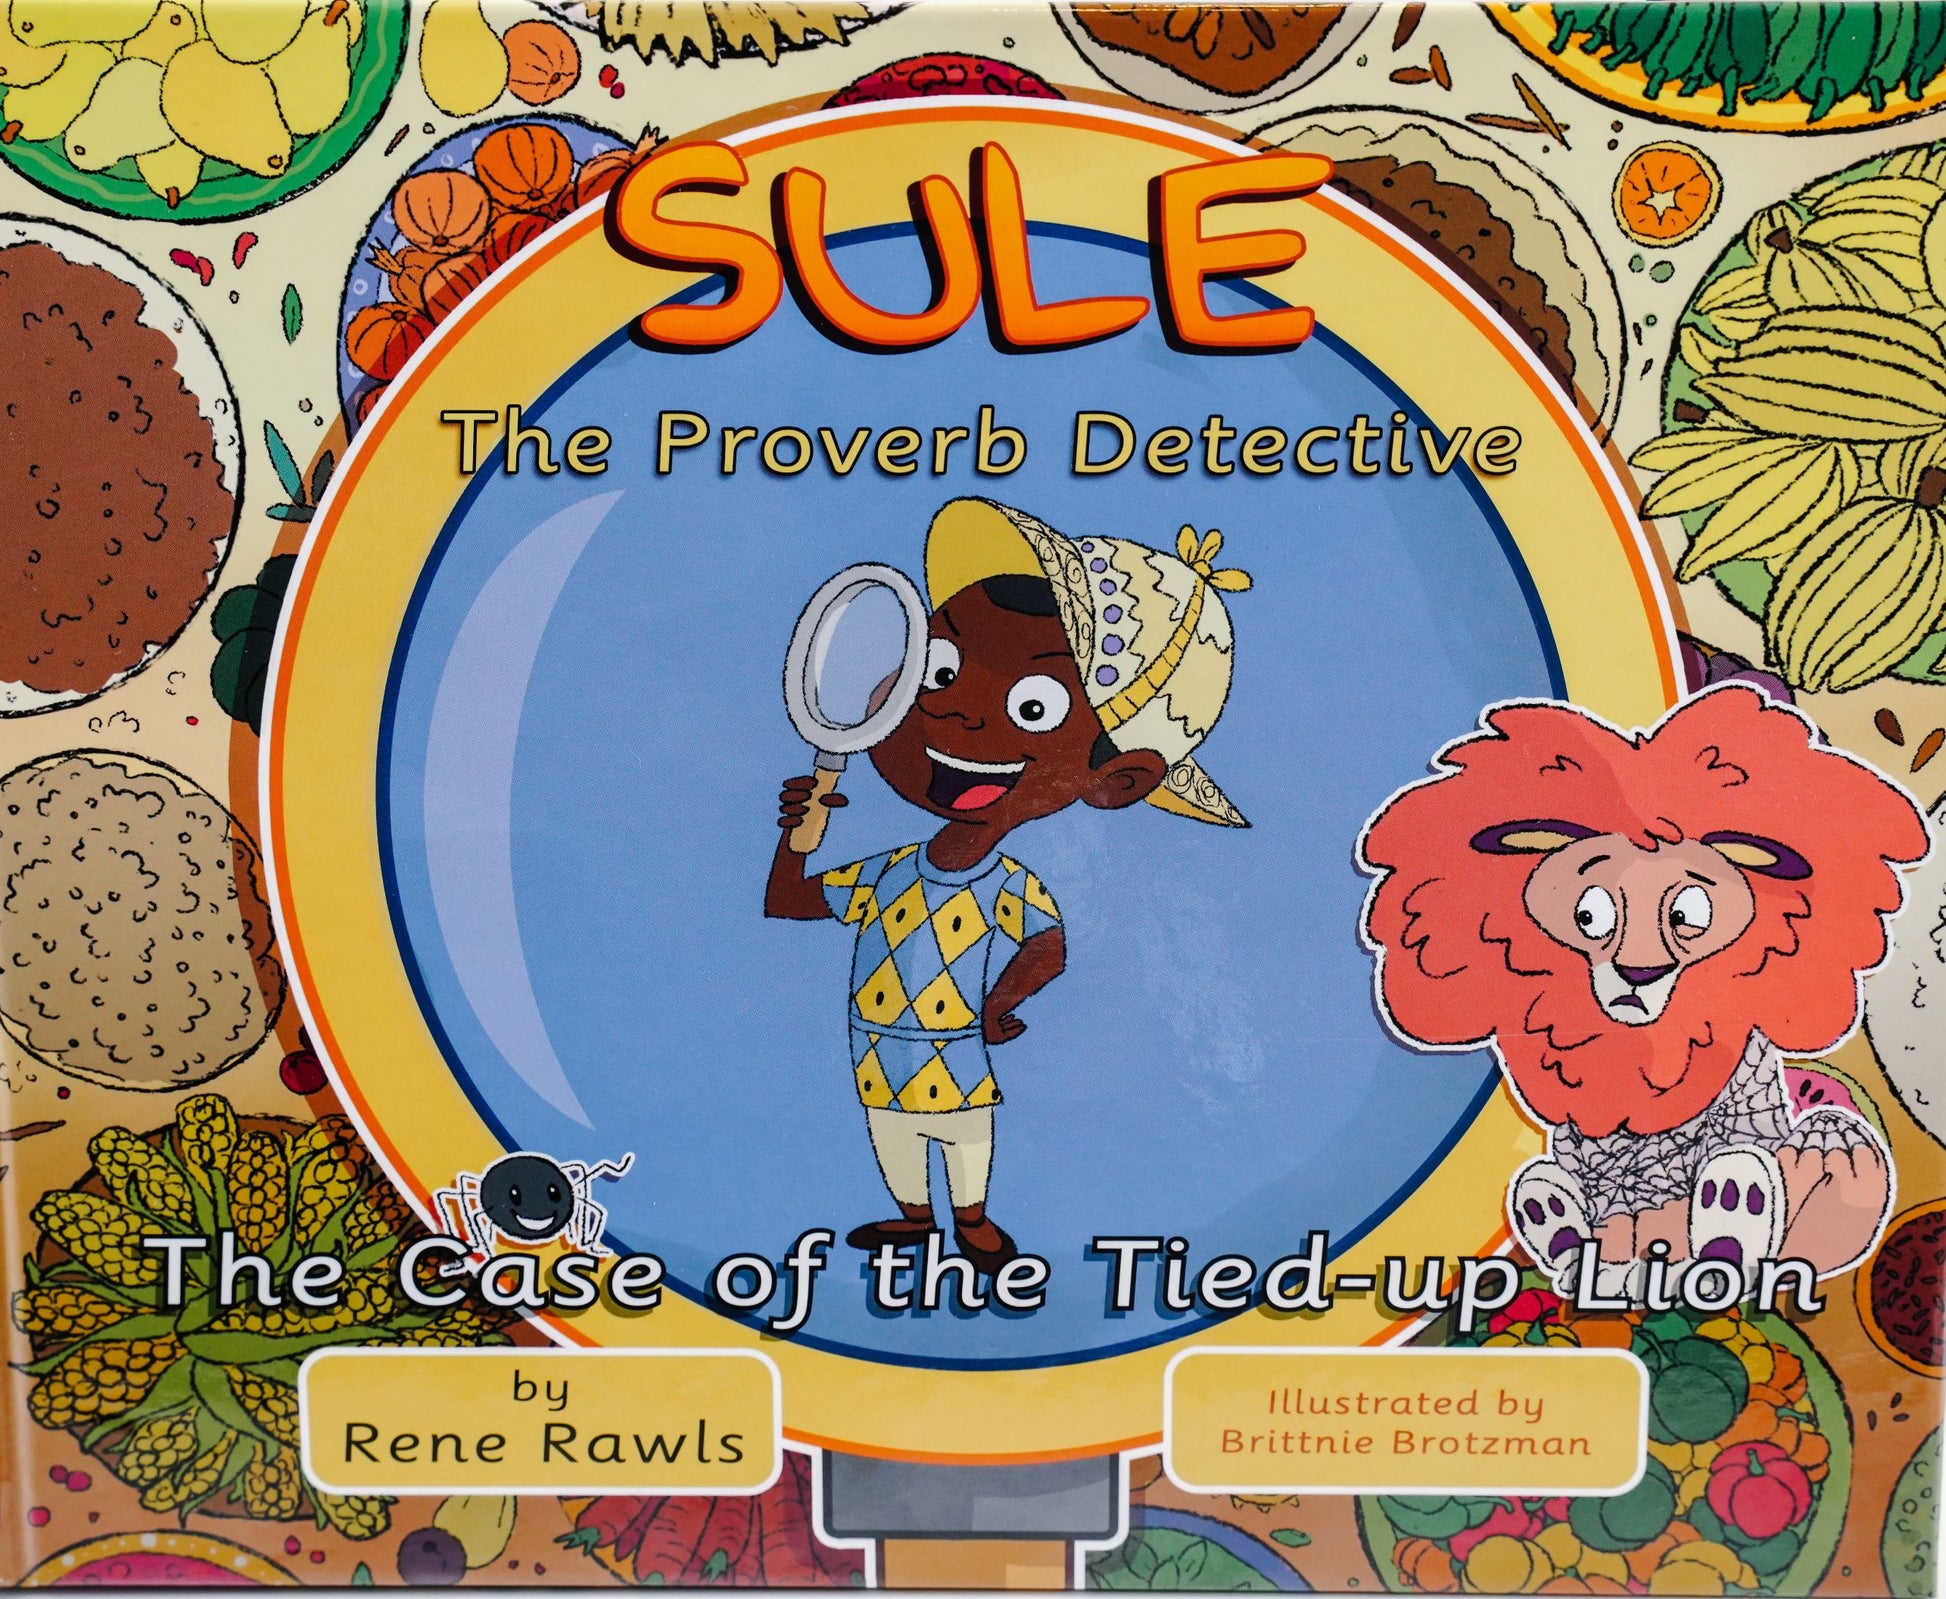 Sule the Proverb Detective: The Case of the Tied-up Lion